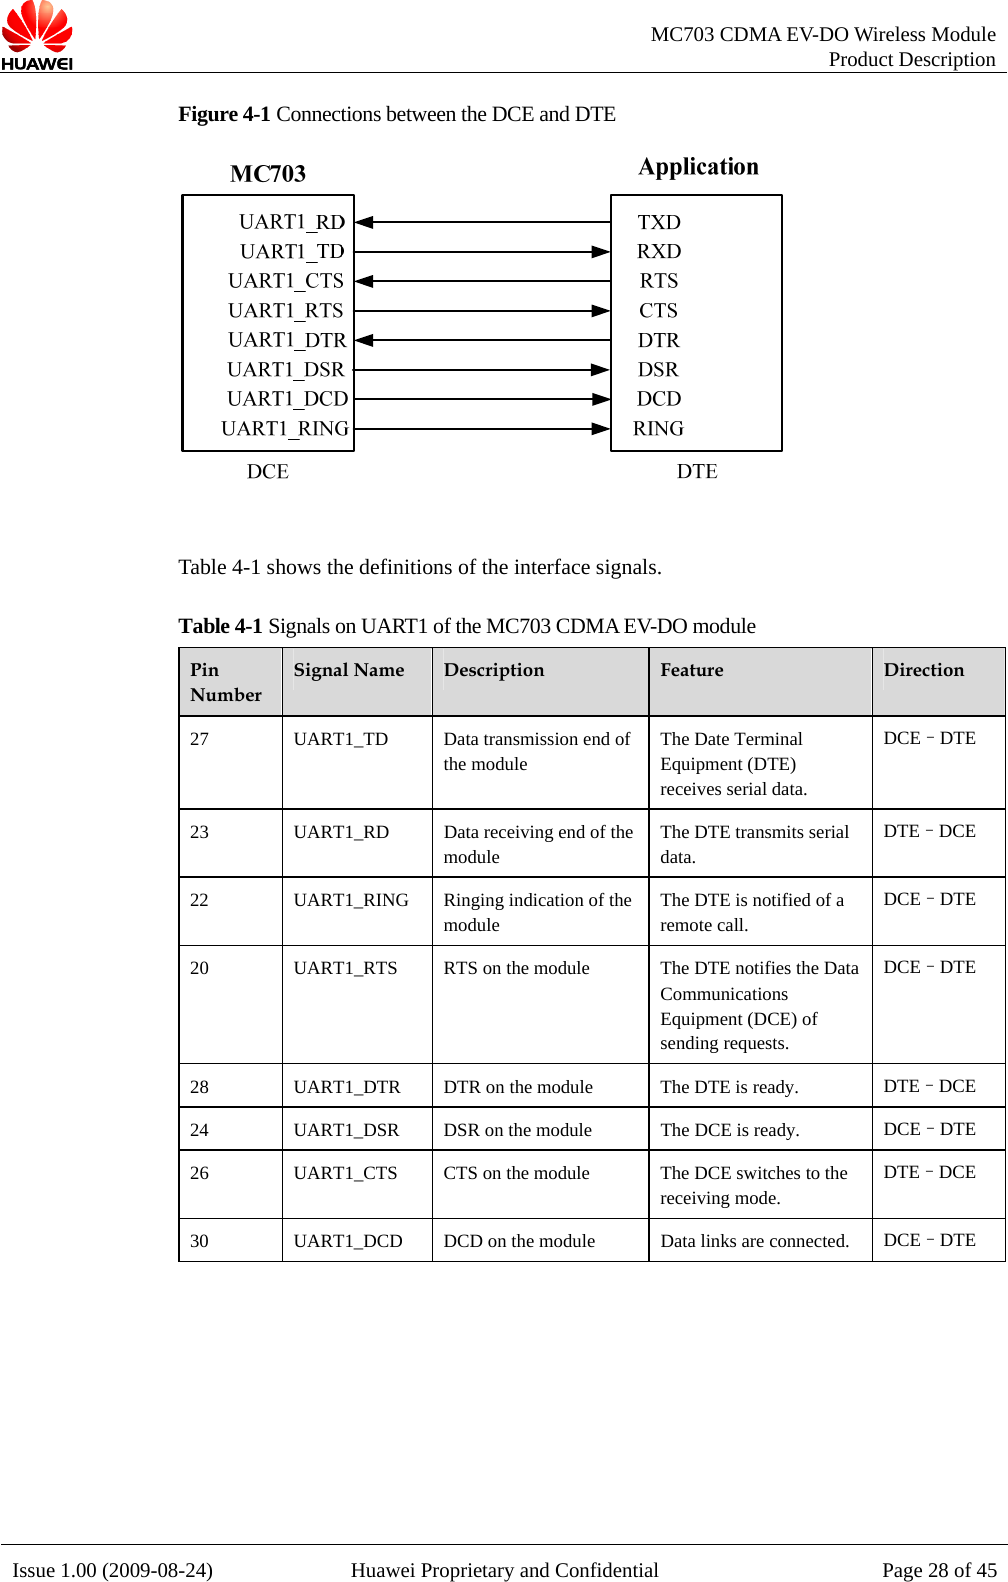   MC703 CDMA EV-DO Wireless Module Product Description Issue 1.00 (2009-08-24)  Huawei Proprietary and Confidential Page 28 of 45Figure 4-1 Connections between the DCE and DTE   Table 4-1 shows the definitions of the interface signals. Table 4-1 Signals on UART1 of the MC703 CDMA EV-DO module Pin Number Signal Name  Description  Feature  Direction 27  UART1_TD    Data transmission end of the module The Date Terminal Equipment (DTE) receives serial data. DCE–DTE 23  UART1_RD  Data receiving end of the module The DTE transmits serial data. DTE–DCE 22 UART1_RING Ringing indication of the module The DTE is notified of a remote call. DCE–DTE 20 UART1_RTS RTS on the module  The DTE notifies the Data Communications Equipment (DCE) of sending requests. DCE–DTE 28 UART1_DTR DTR on the module  The DTE is ready.  DTE–DCE 24 UART1_DSR DSR on the module    The DCE is ready.  DCE–DTE 26 UART1_CTS CTS on the module  The DCE switches to the receiving mode.   DTE–DCE 30 UART1_DCD DCD on the module  Data links are connected.  DCE–DTE   